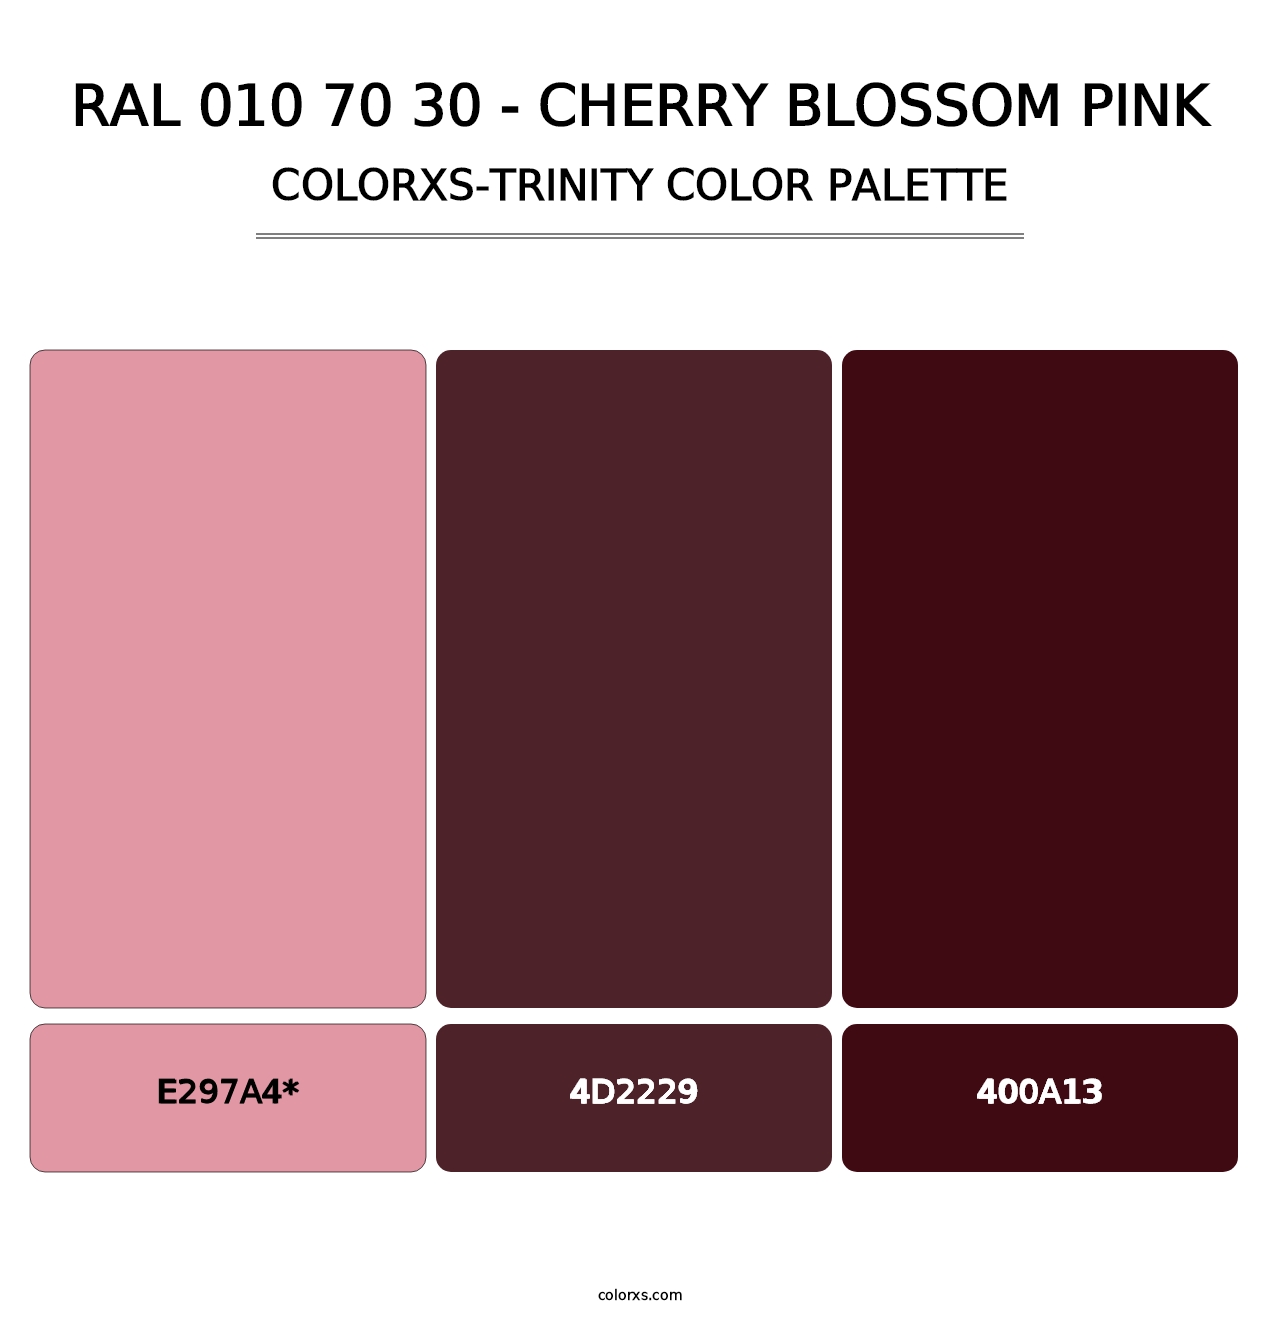 RAL 010 70 30 - Cherry Blossom Pink - Colorxs Trinity Palette